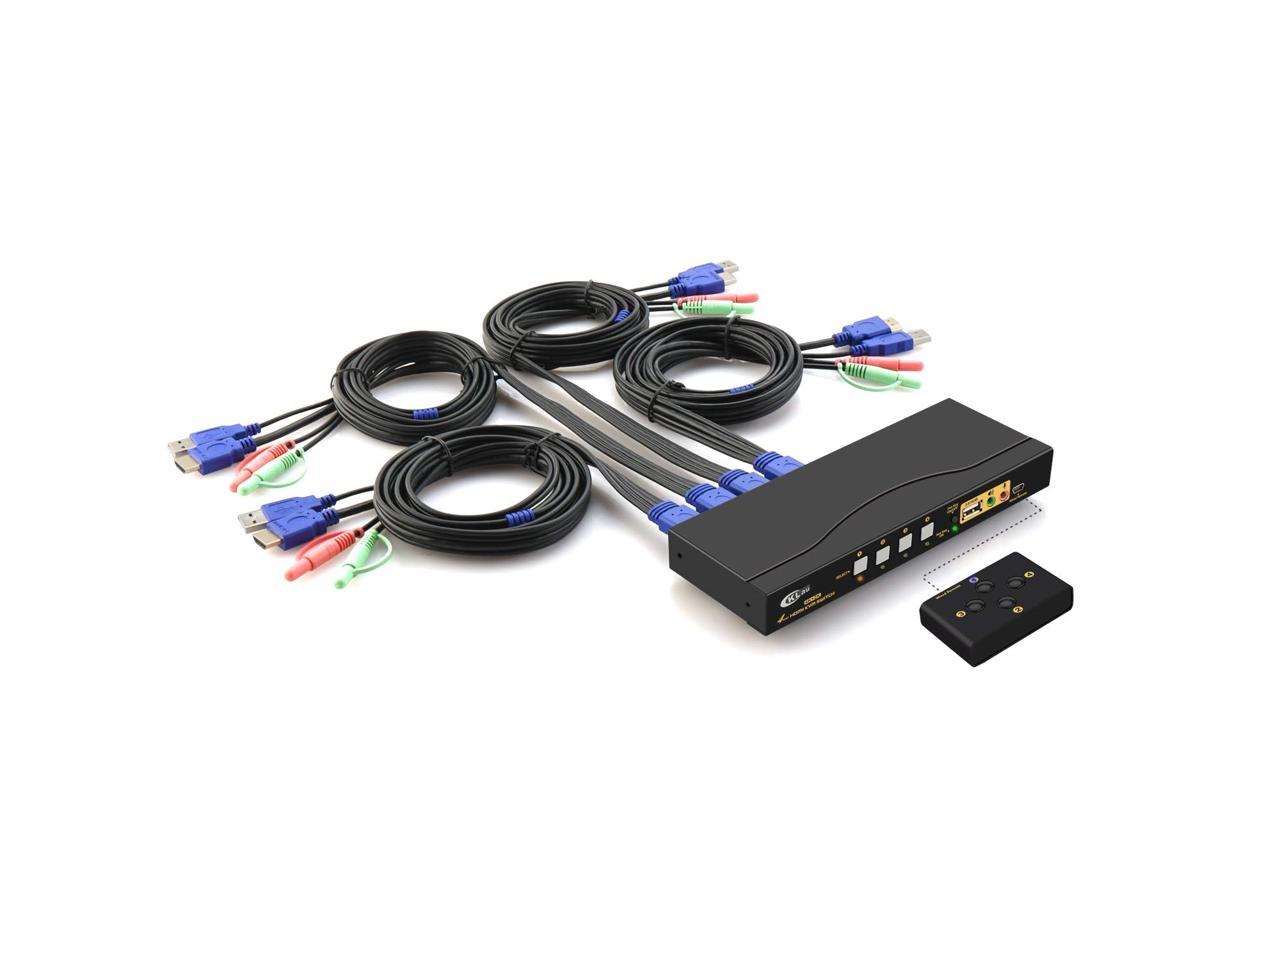 CKLau Ultra HD 4 Port HDMI 2.0 Cables KVM Switch with Audio and USB 2.0 Hub Support Keyboard Mouse Switching Max Resolution Up to 4Kx2K@60Hz 4:4:4 for Windows Mac Raspbian Ubuntu Linux 